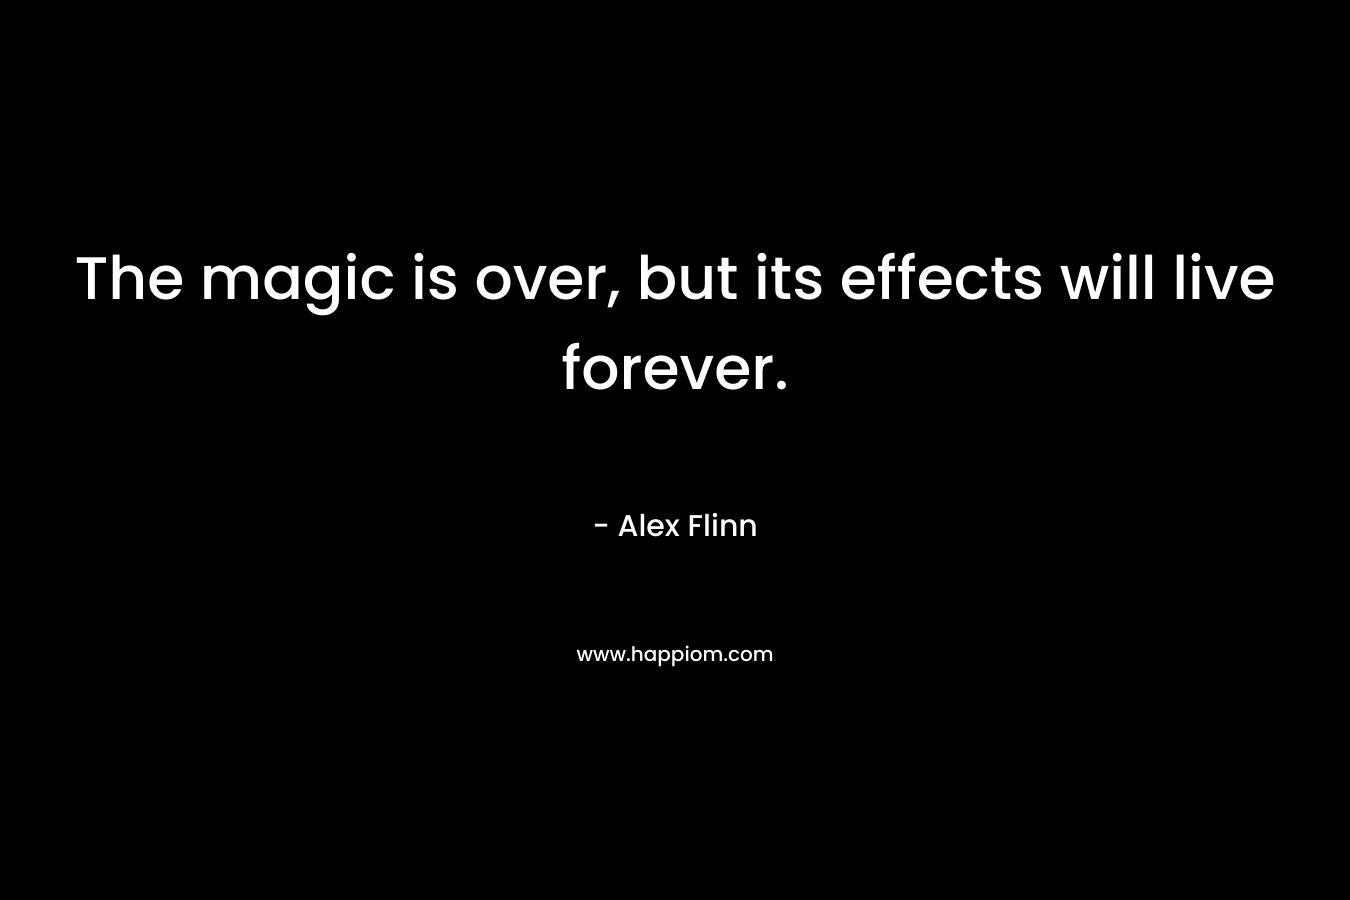 The magic is over, but its effects will live forever. – Alex Flinn